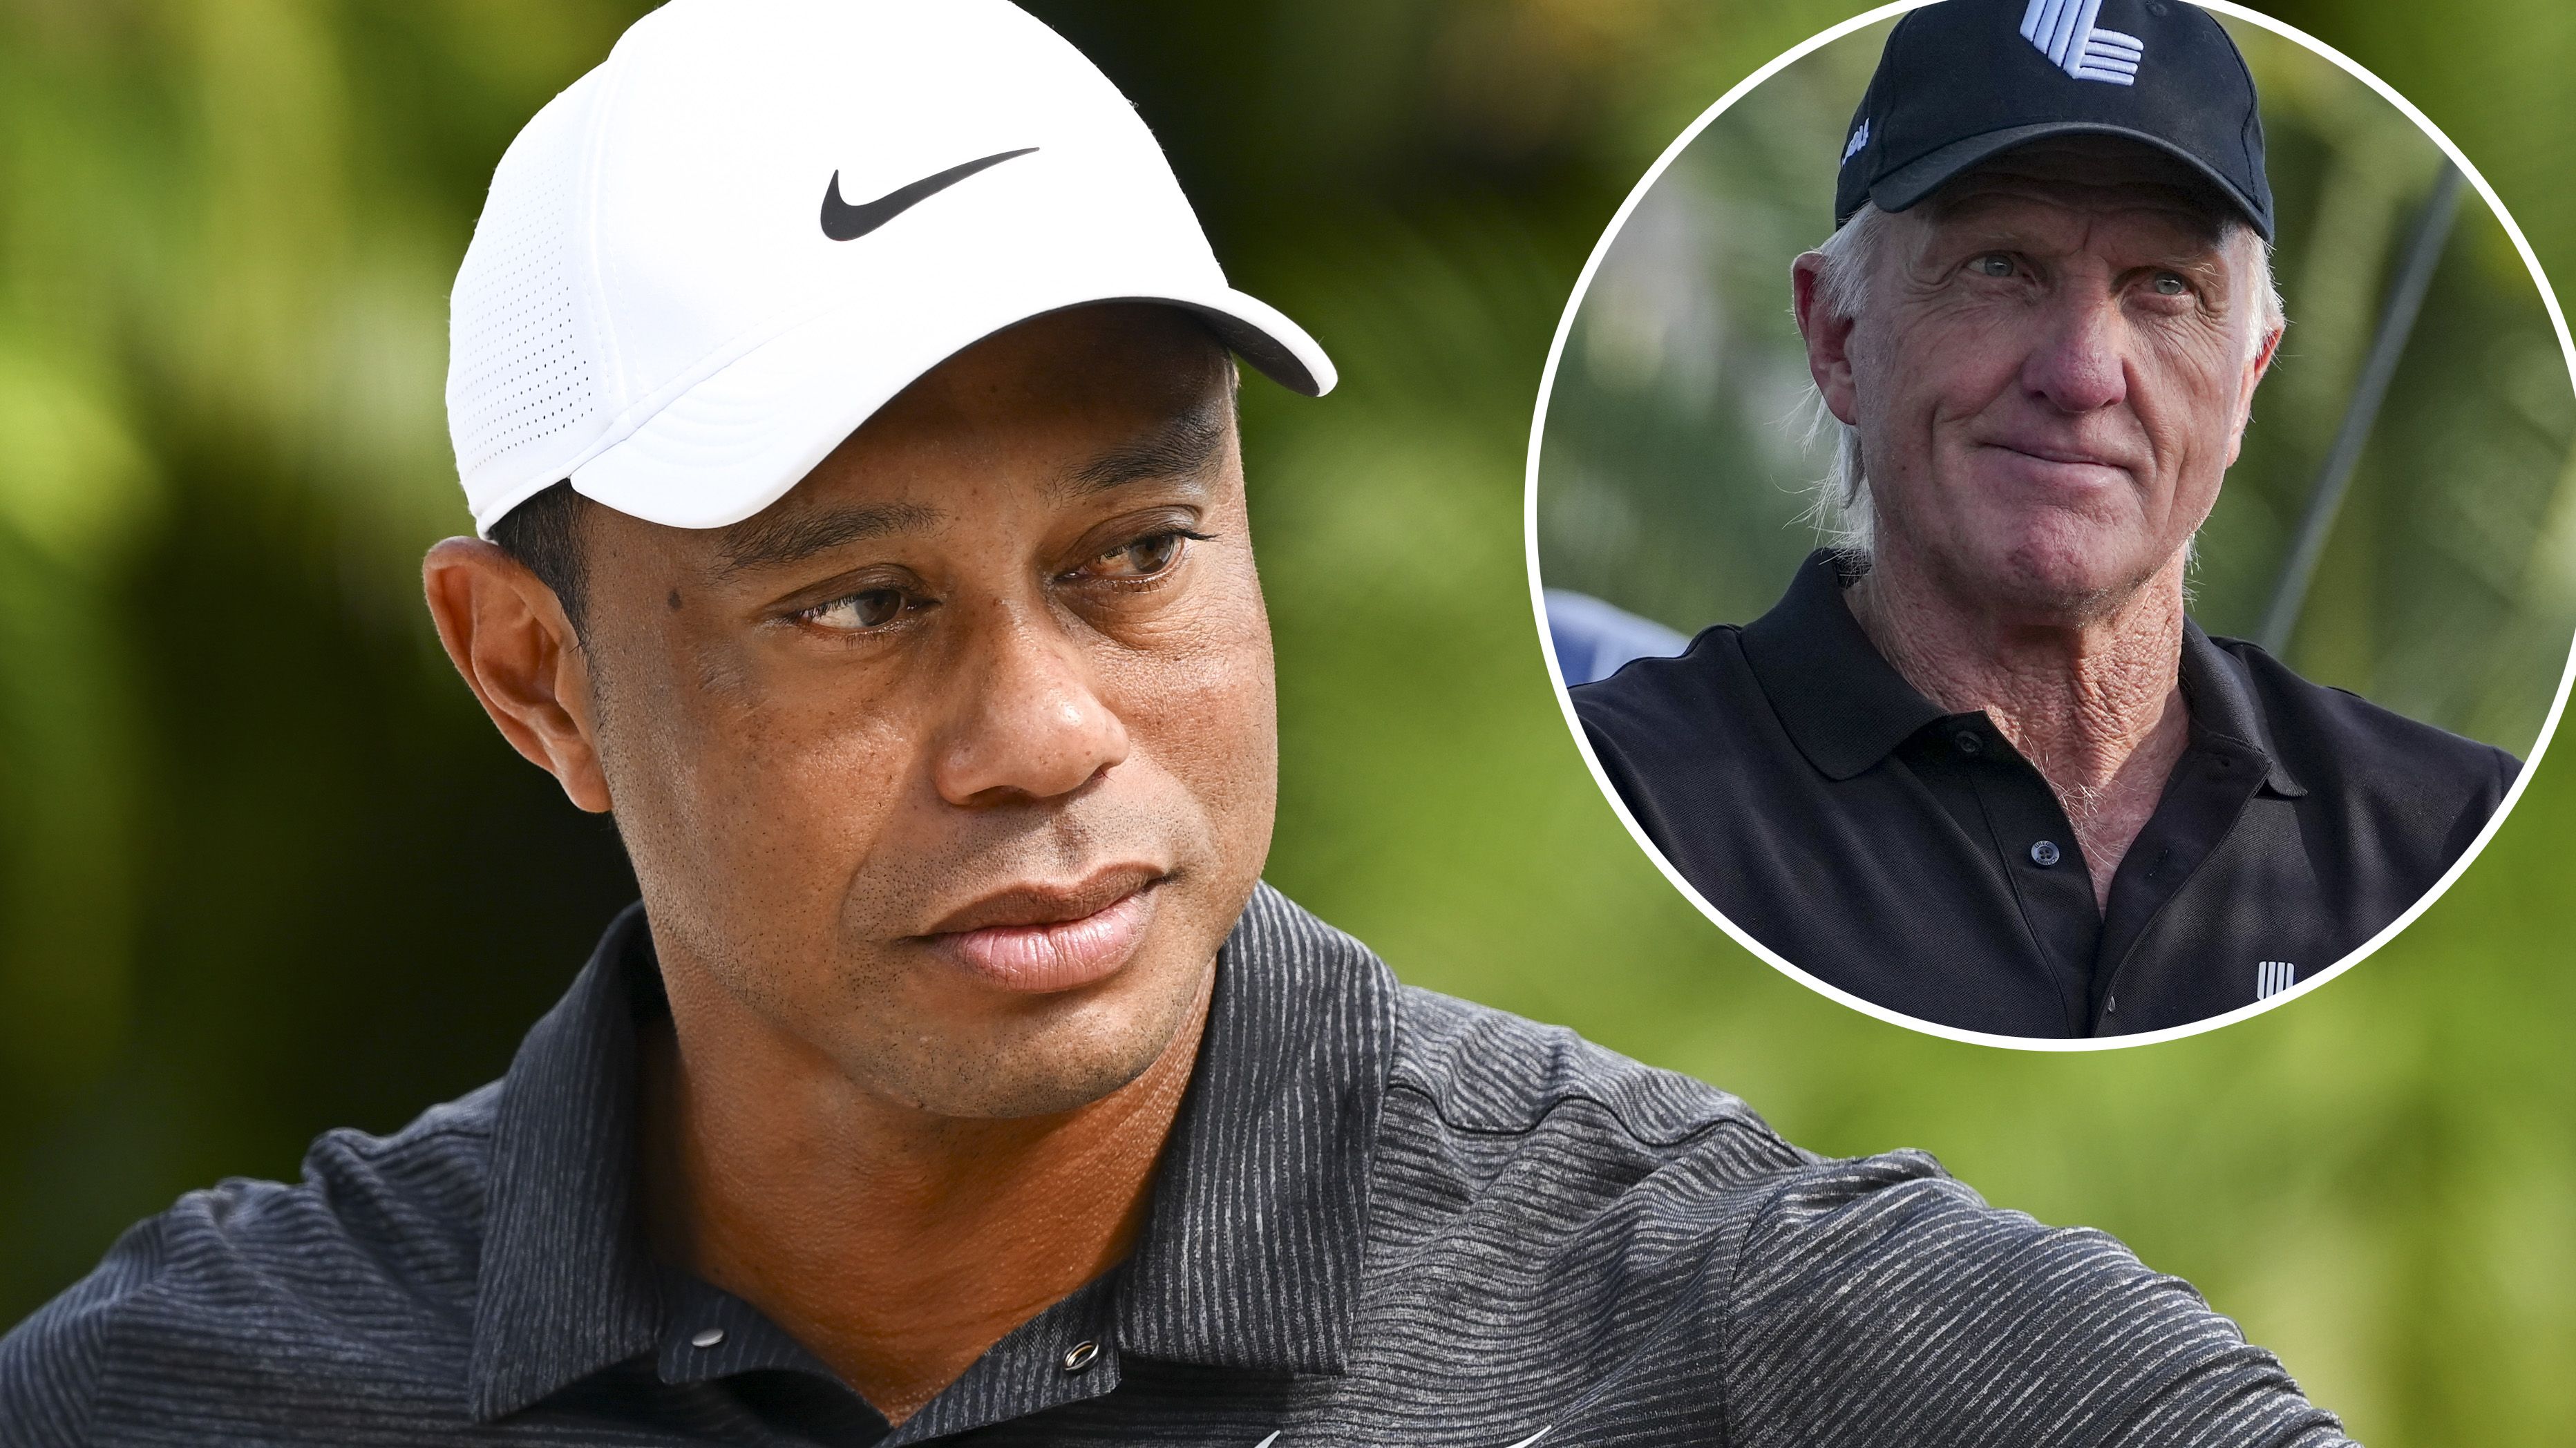 Tiger Woods has hit out at LIV Golf boss Greg Norman for creating a rift in the sport.